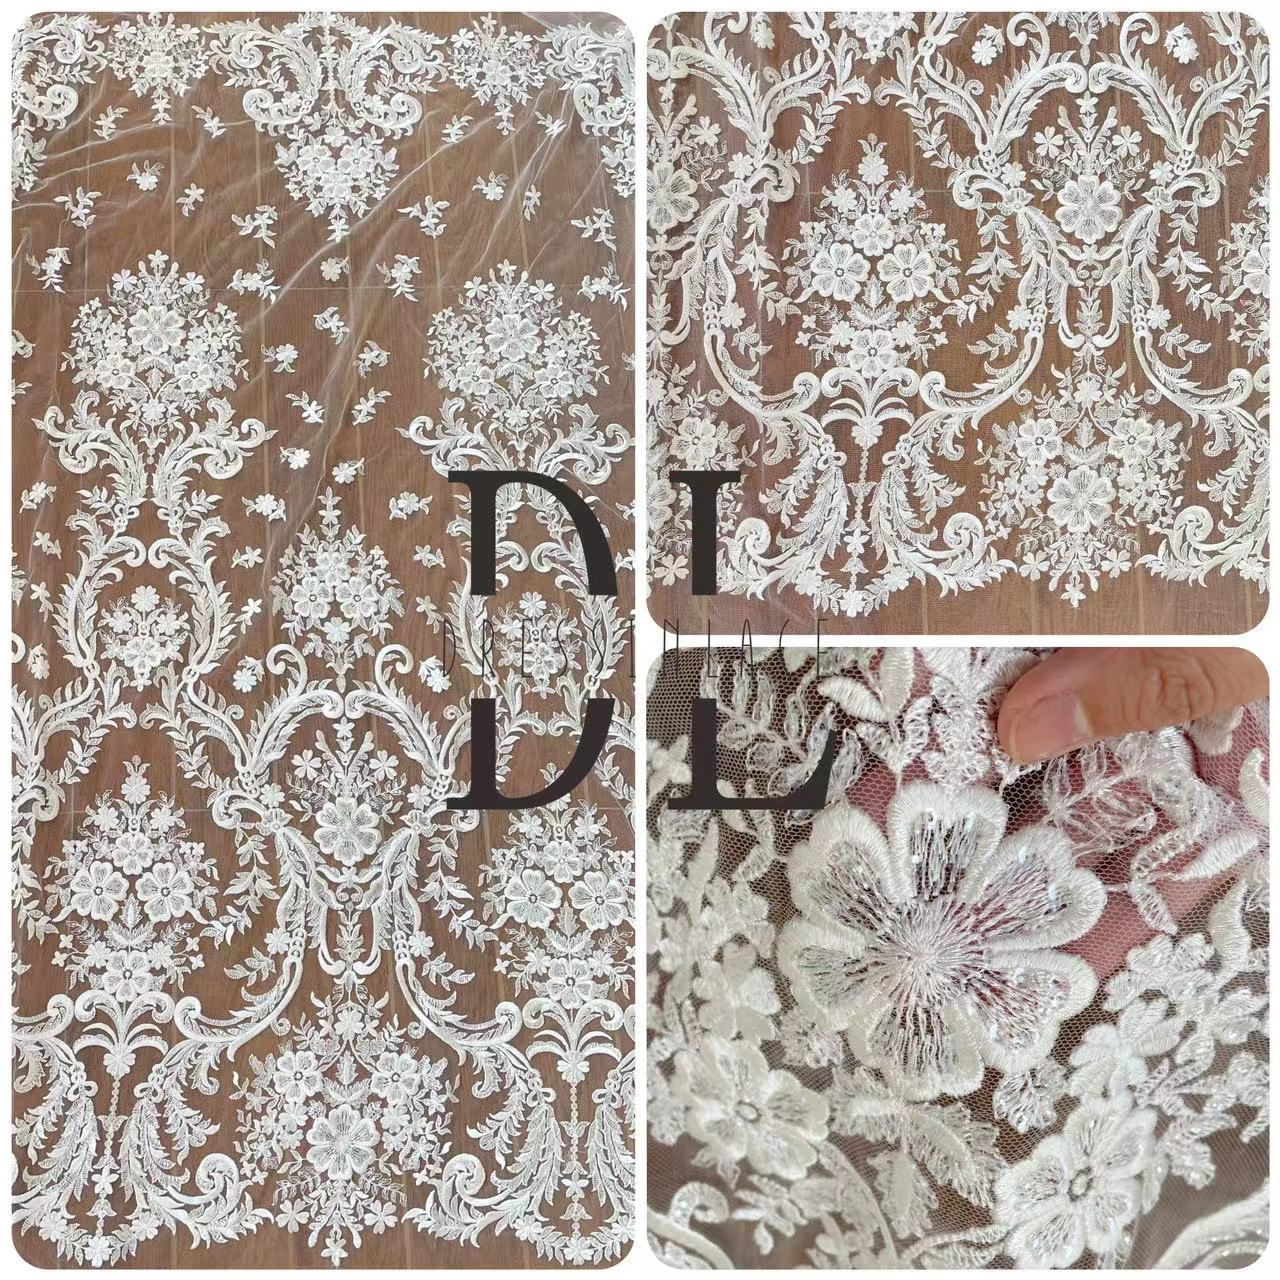 DL130005 Thick Embroidery Lace Fabric for Wedding Dress - Shimmering Transparent Mesh with Trendy Floral Elements and Fluid Lines DL130005